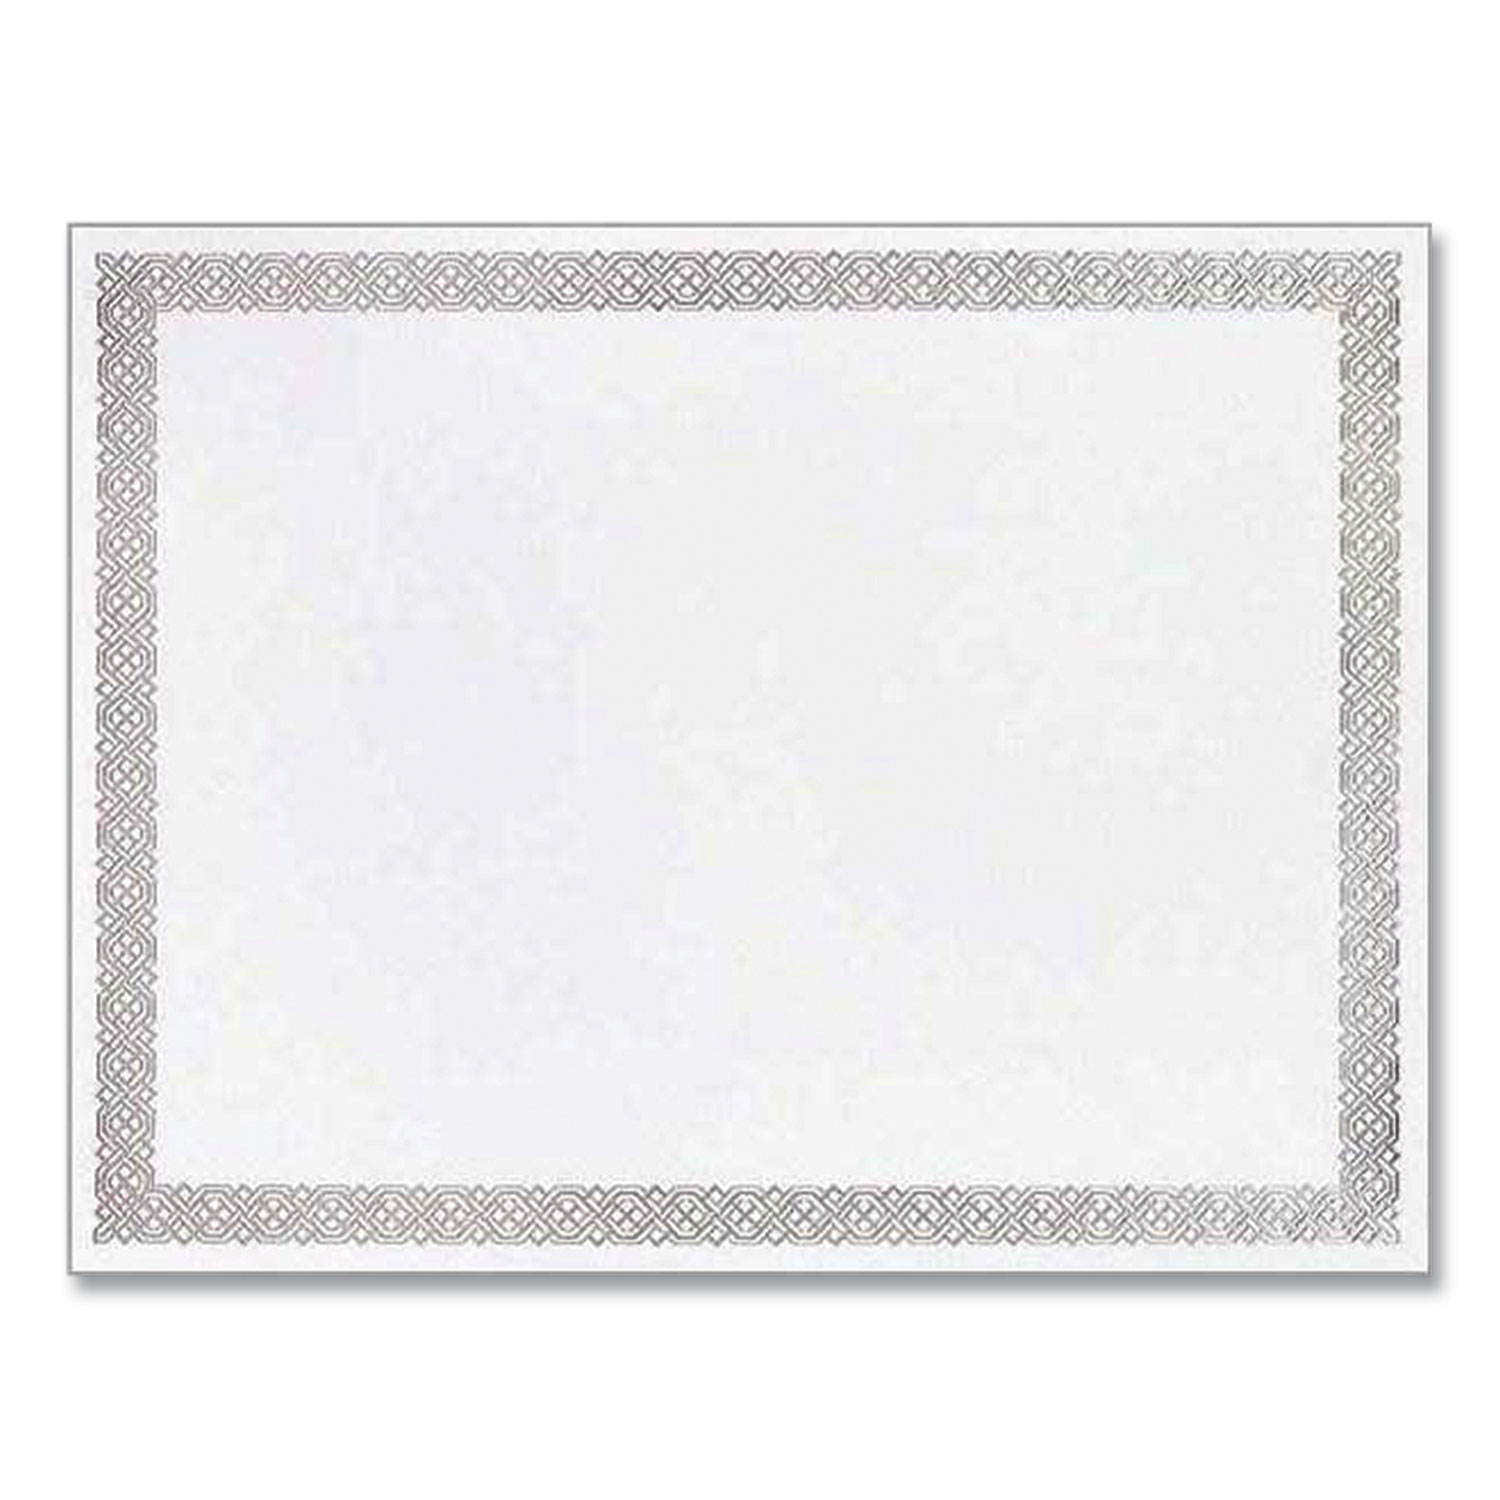 Great Papers!® Foil Border Certificates, 8.5 x 11, Ivory/Silver, Braided, 15/Pack